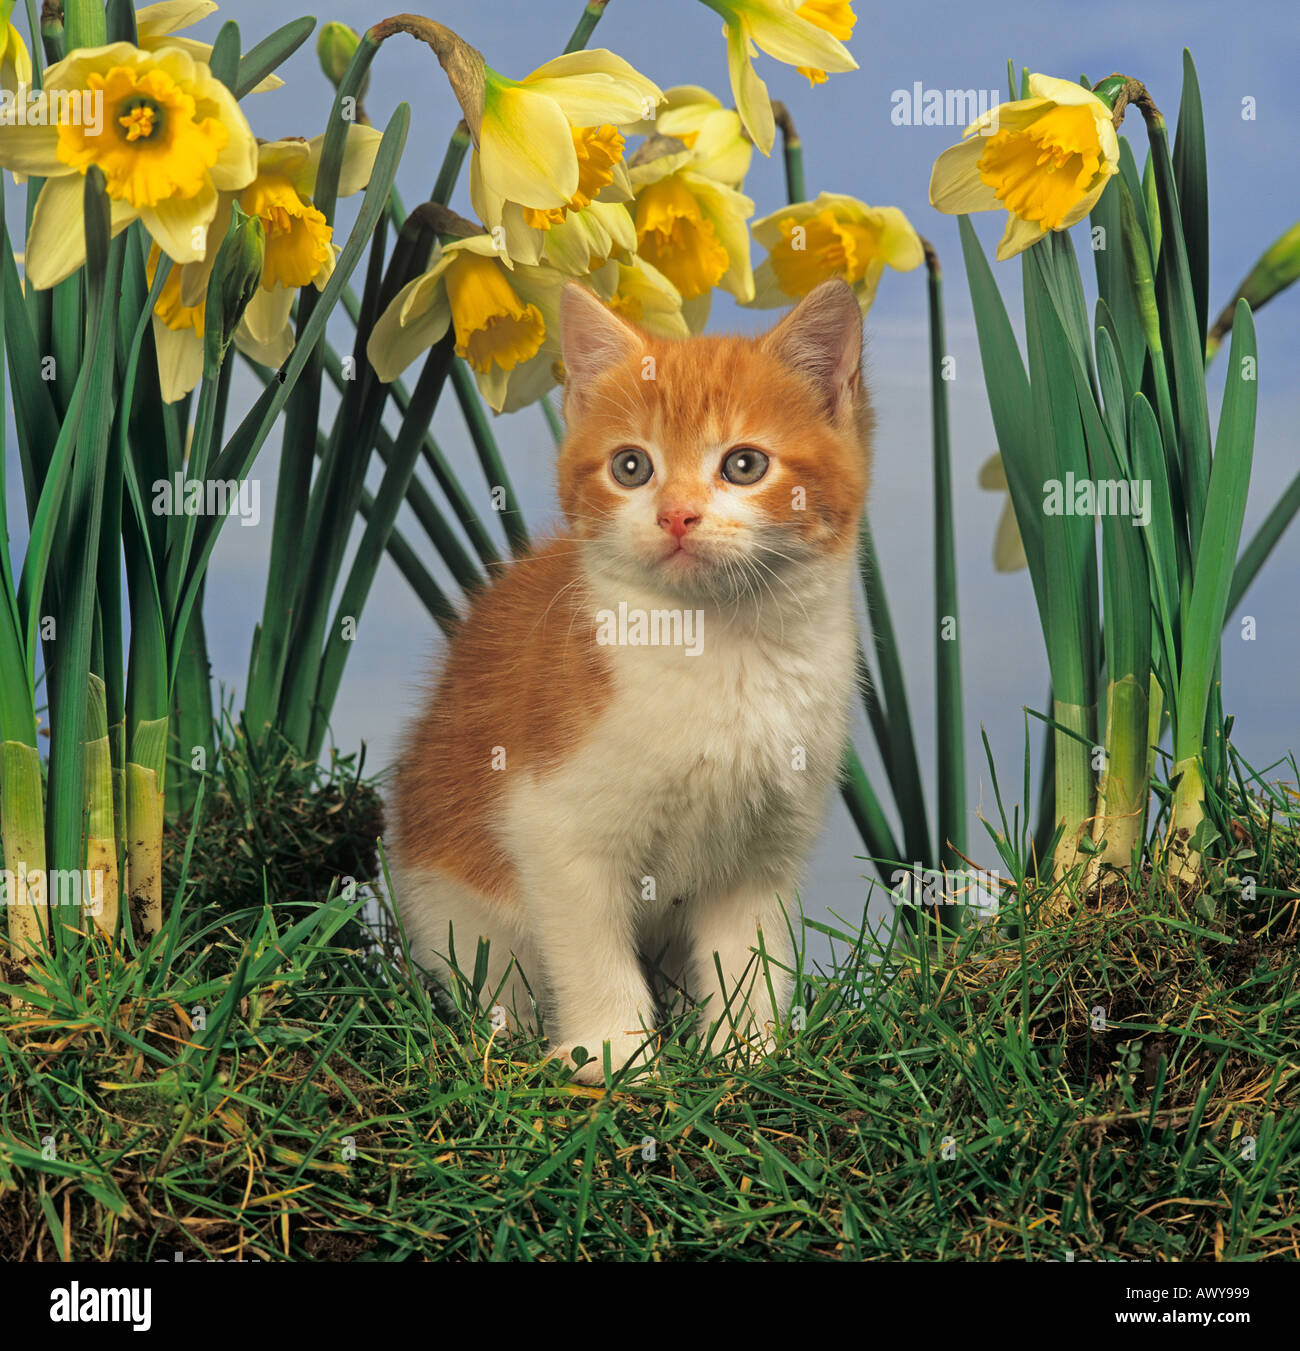 Ginger Kitten Looking from Daffodils Stock Photo